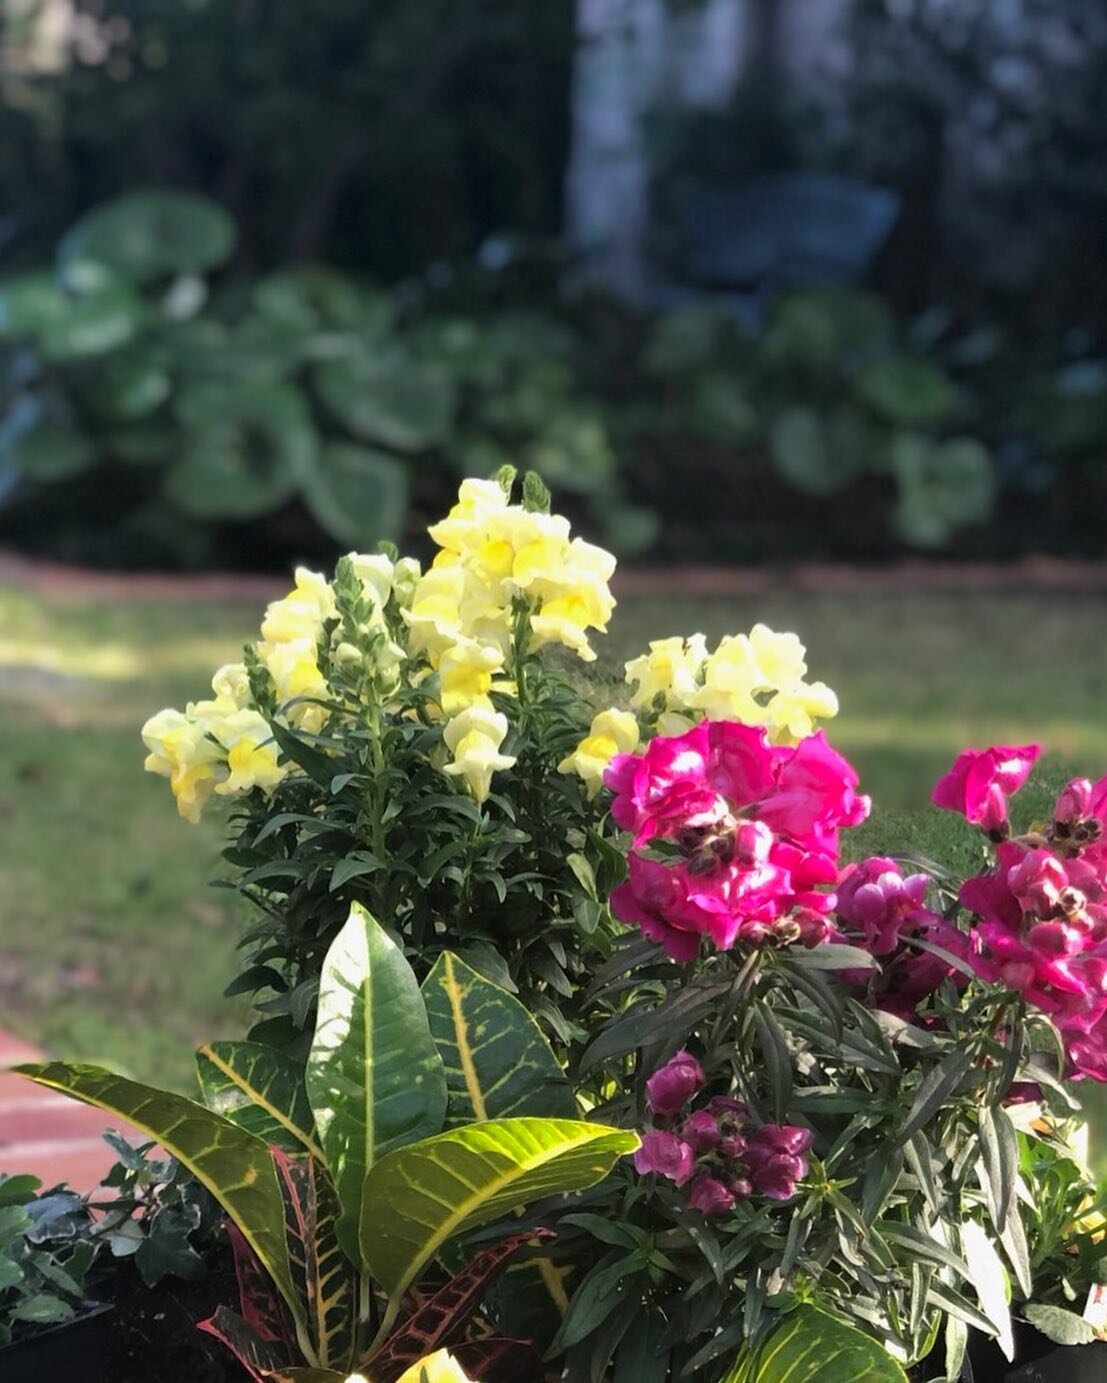 Look out for snapdragons in bloom, bringing a fun pop of color to yards around Houston this fall and winter!

#Snapdragon #HAXEL #Haxellence #HoustonLandscaping #Houston #Landscaping